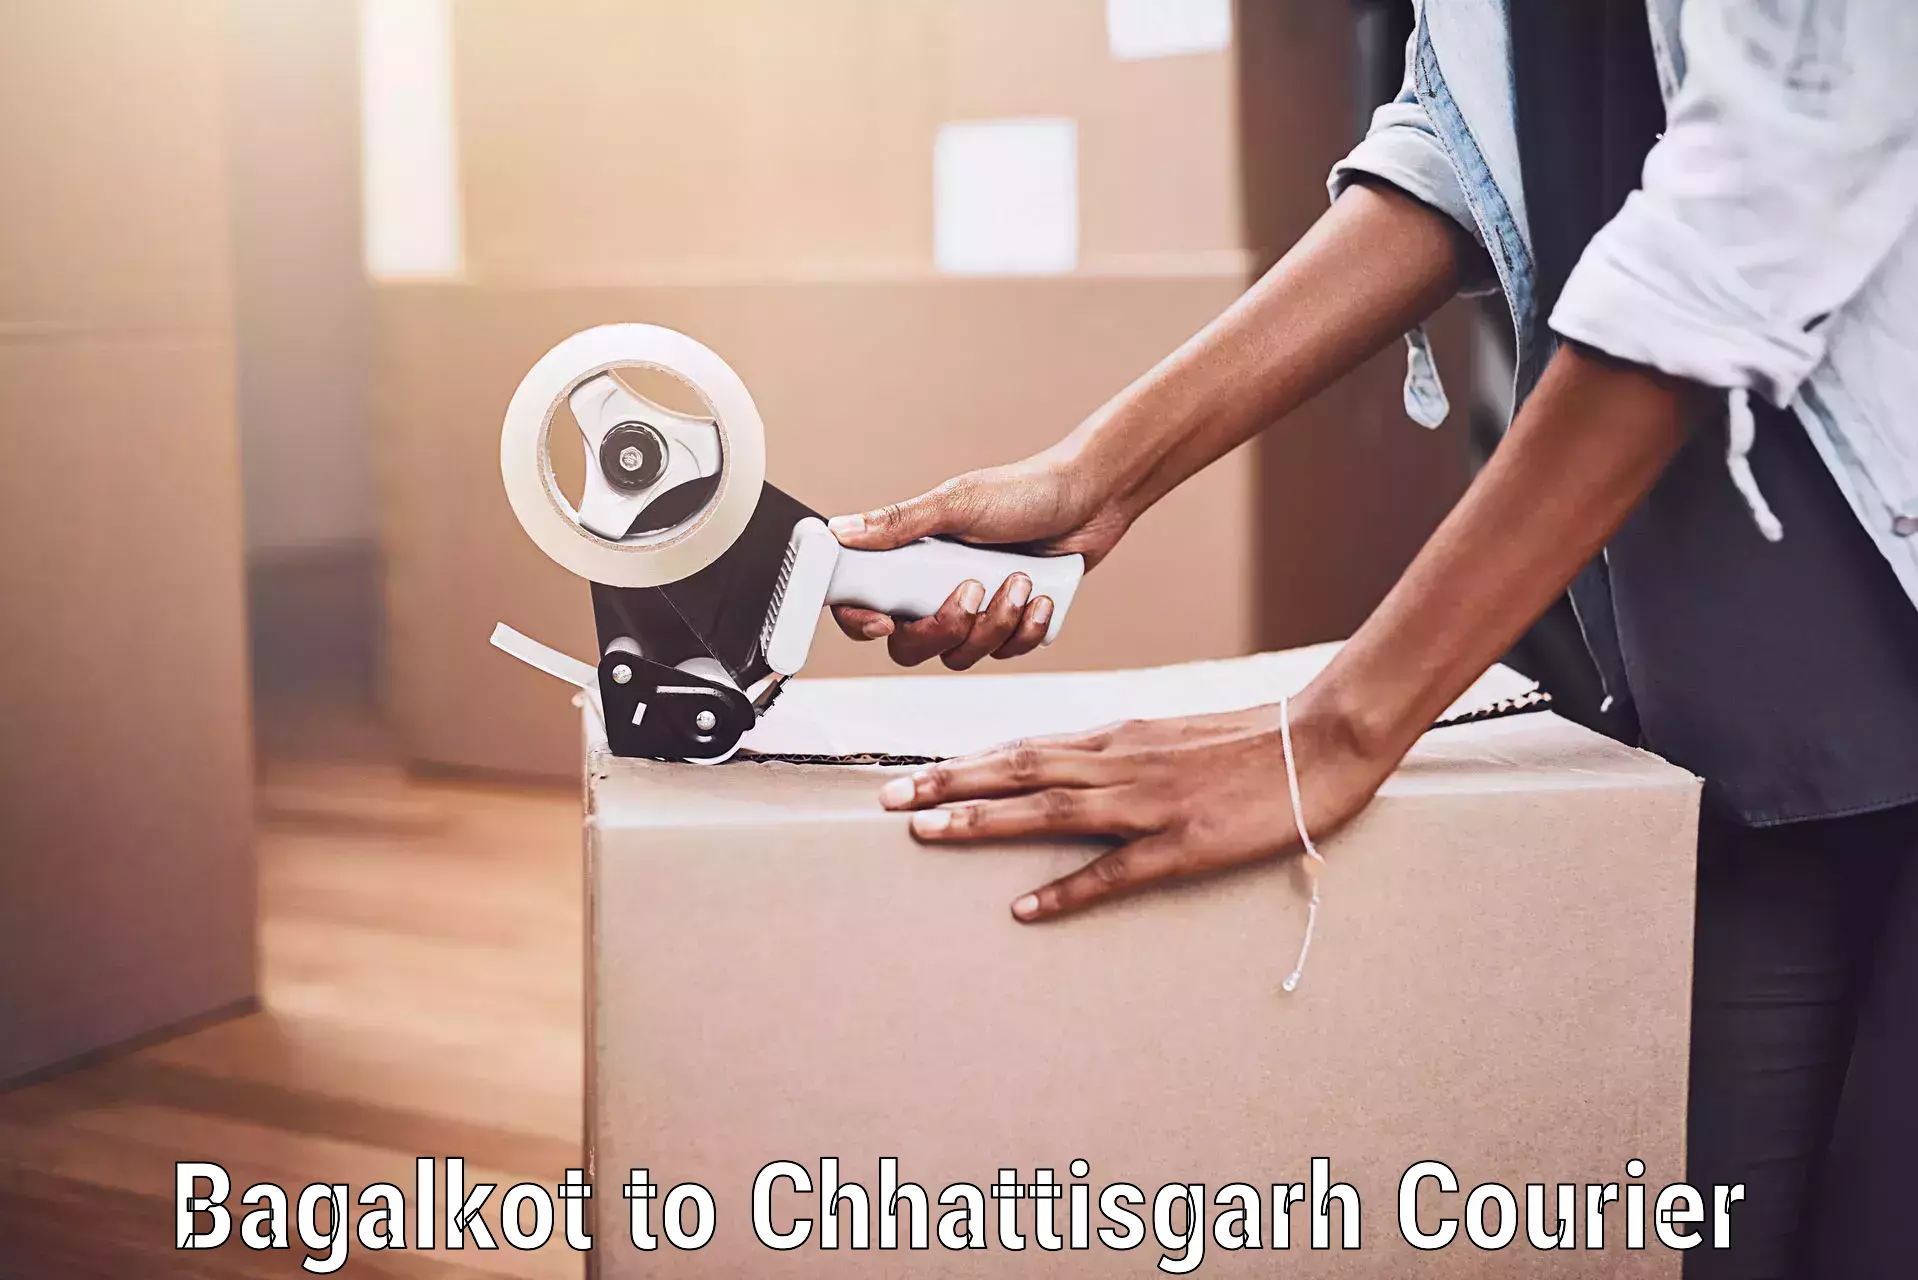 Baggage delivery management Bagalkot to Chhattisgarh